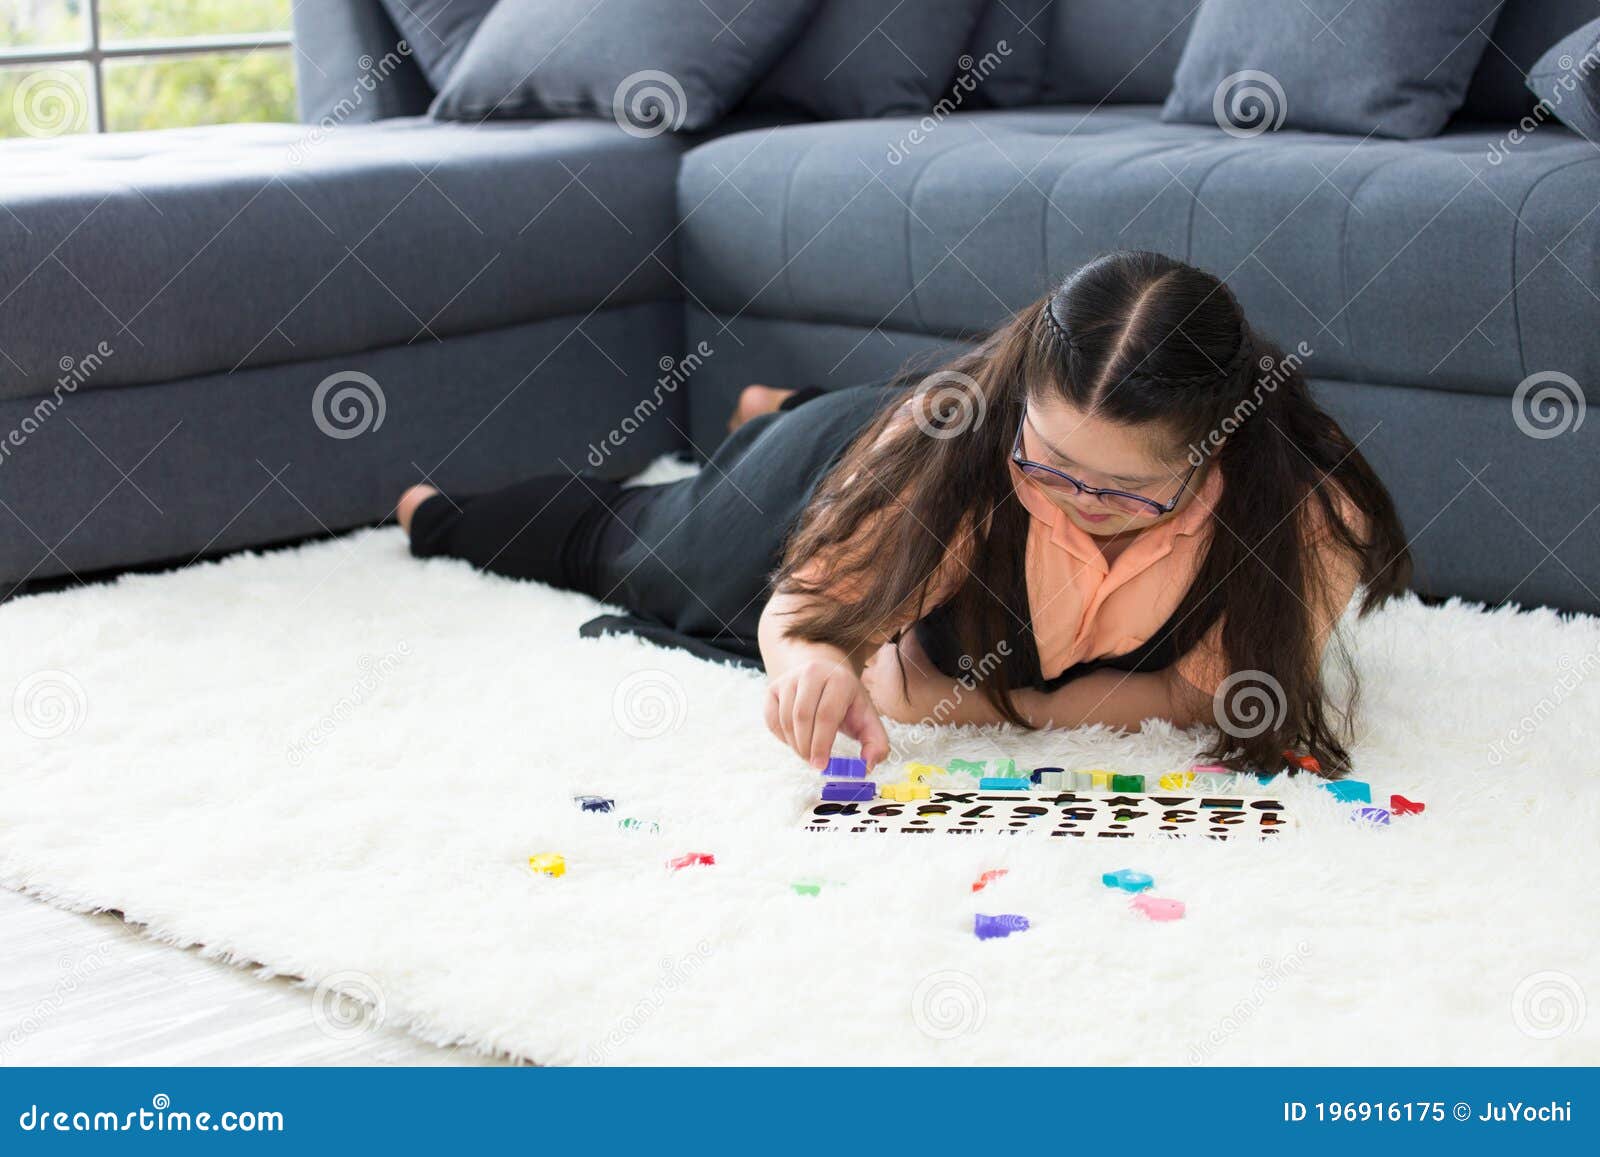 Autism Girl Enjoys Playing With Toys At Home Stock Image Image Of Activity Autism 196916175